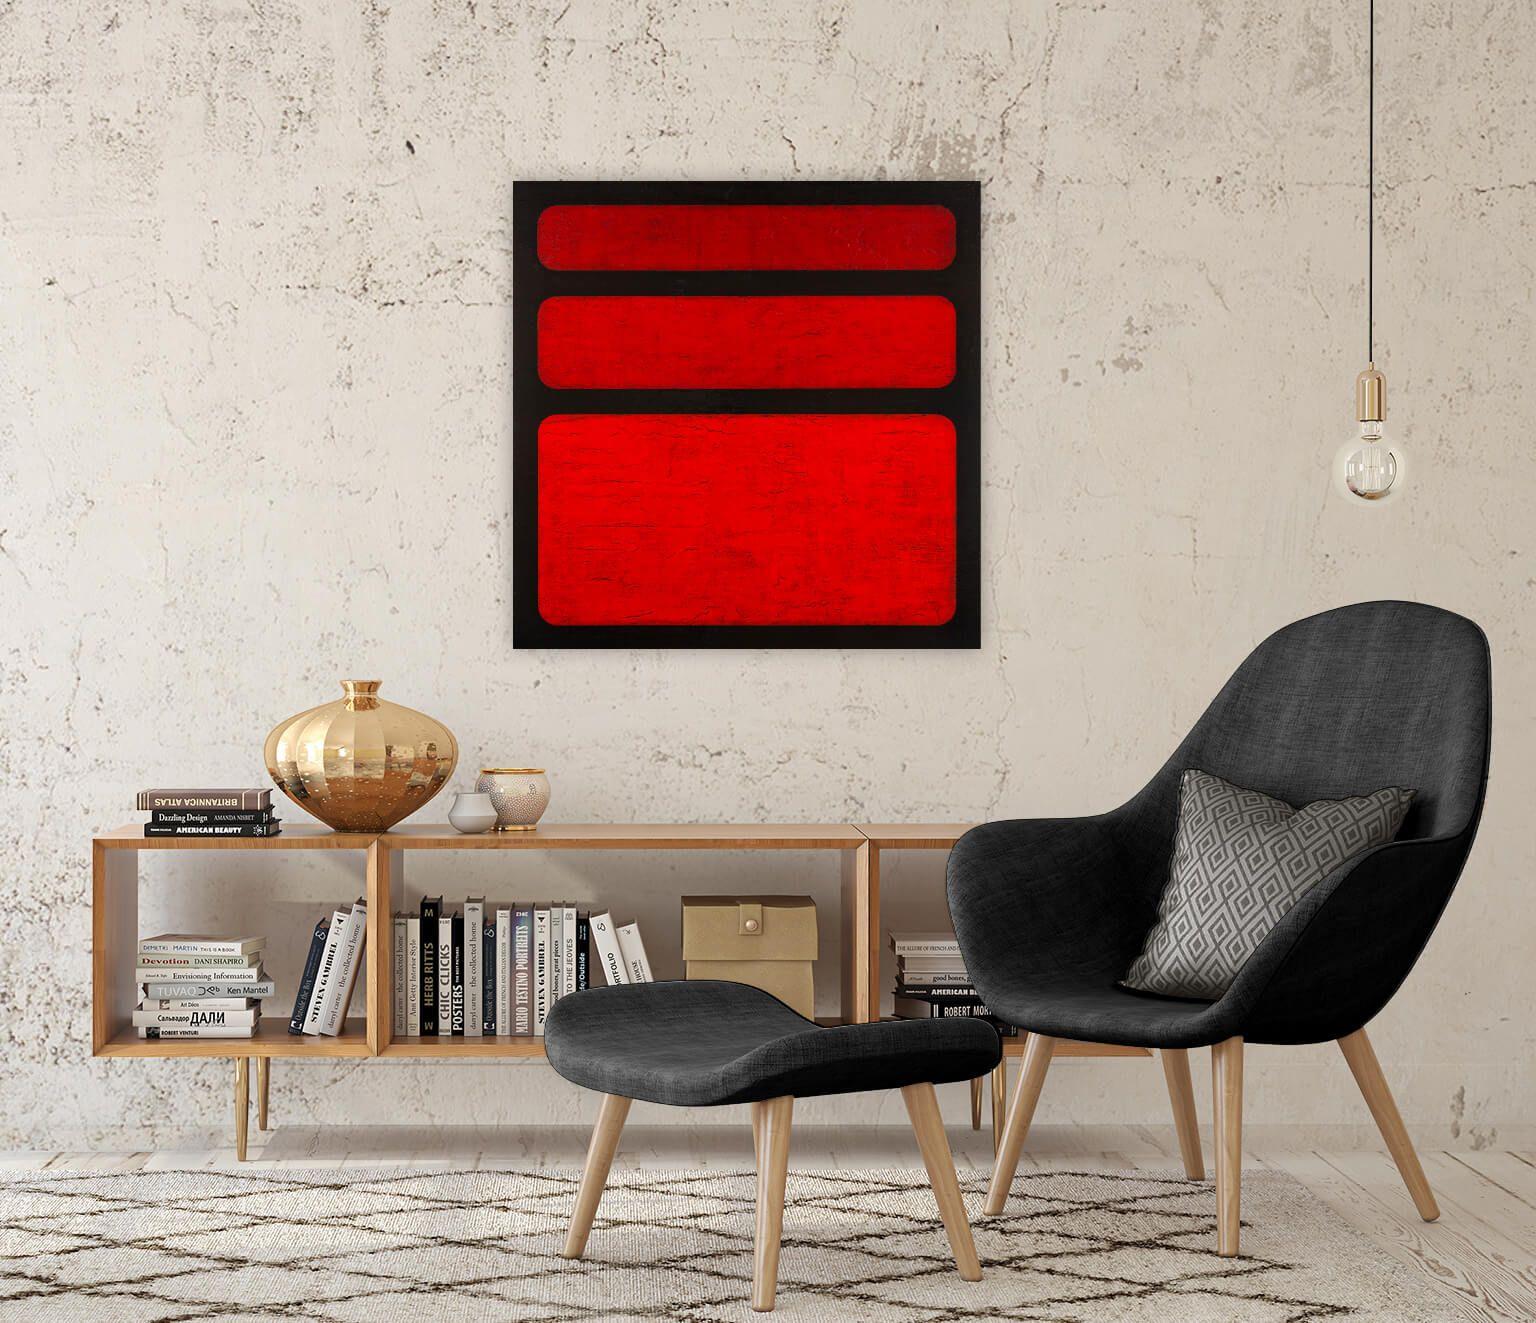 Simply Red is Rothko inspired abstract painting in all red and black.  The cadmium color red gets lighter as you move down the painting. The underlying texture is highlighted throughout the painting and finished with a gloss UVL varnish that really